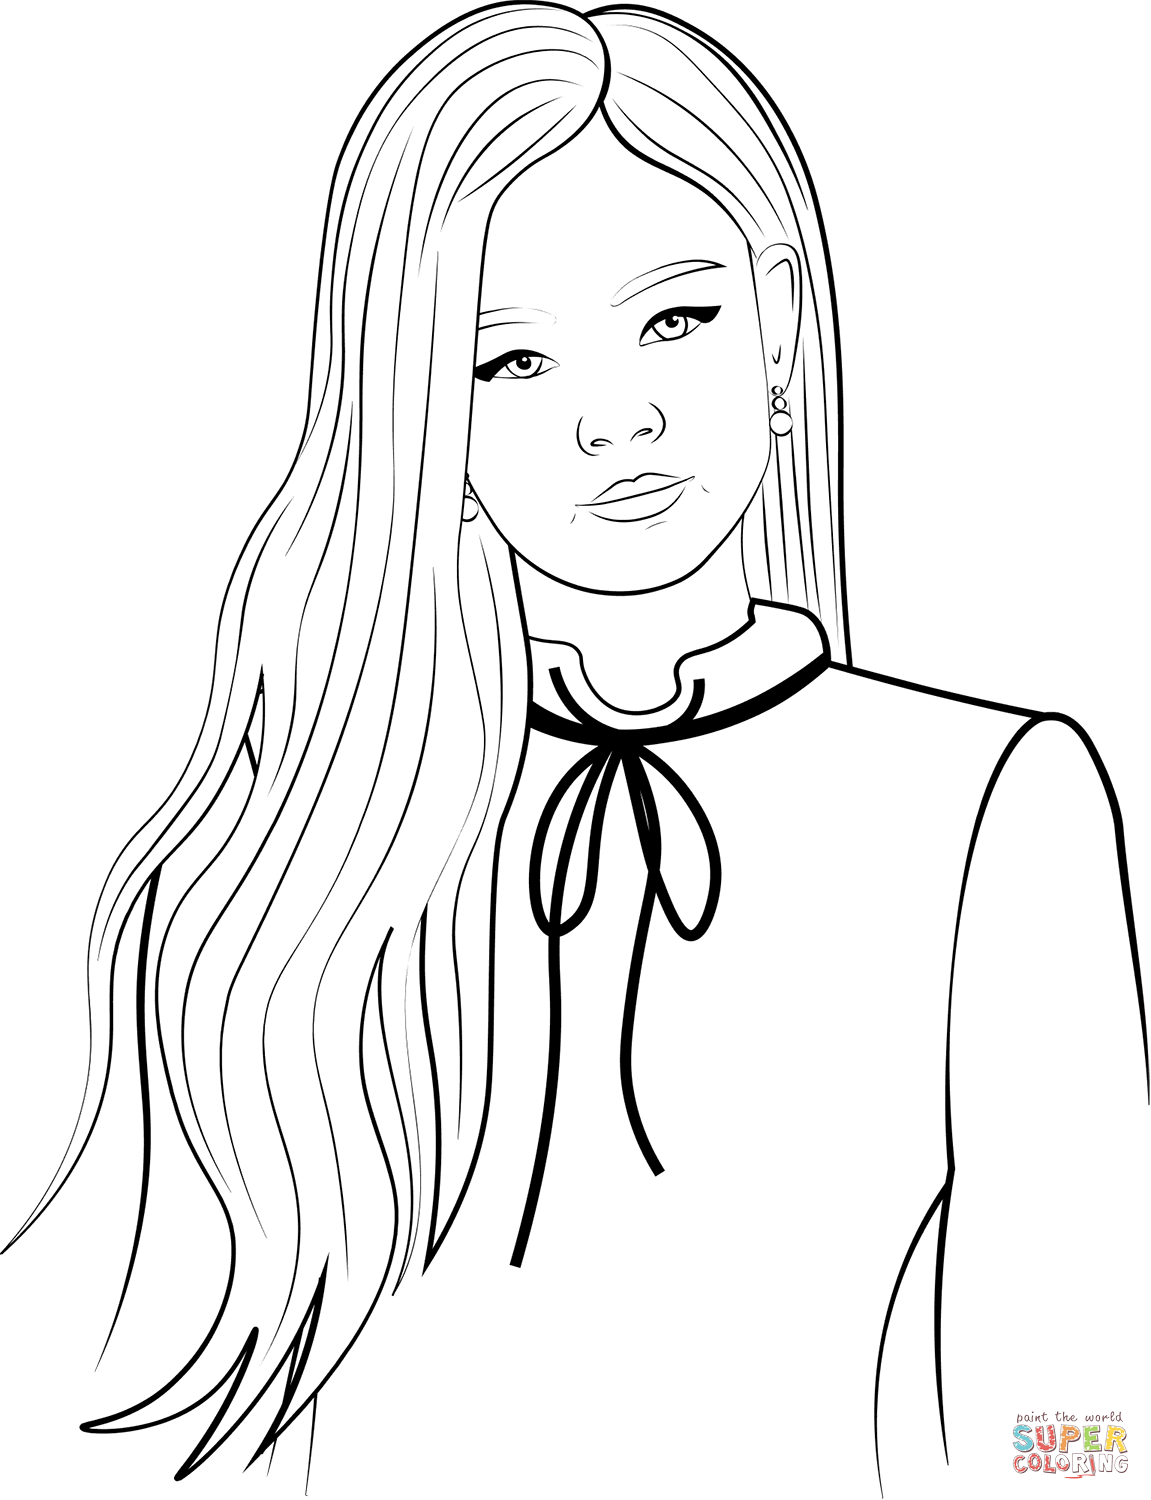 Kim jennie from blackpink coloring page free printable coloring pages